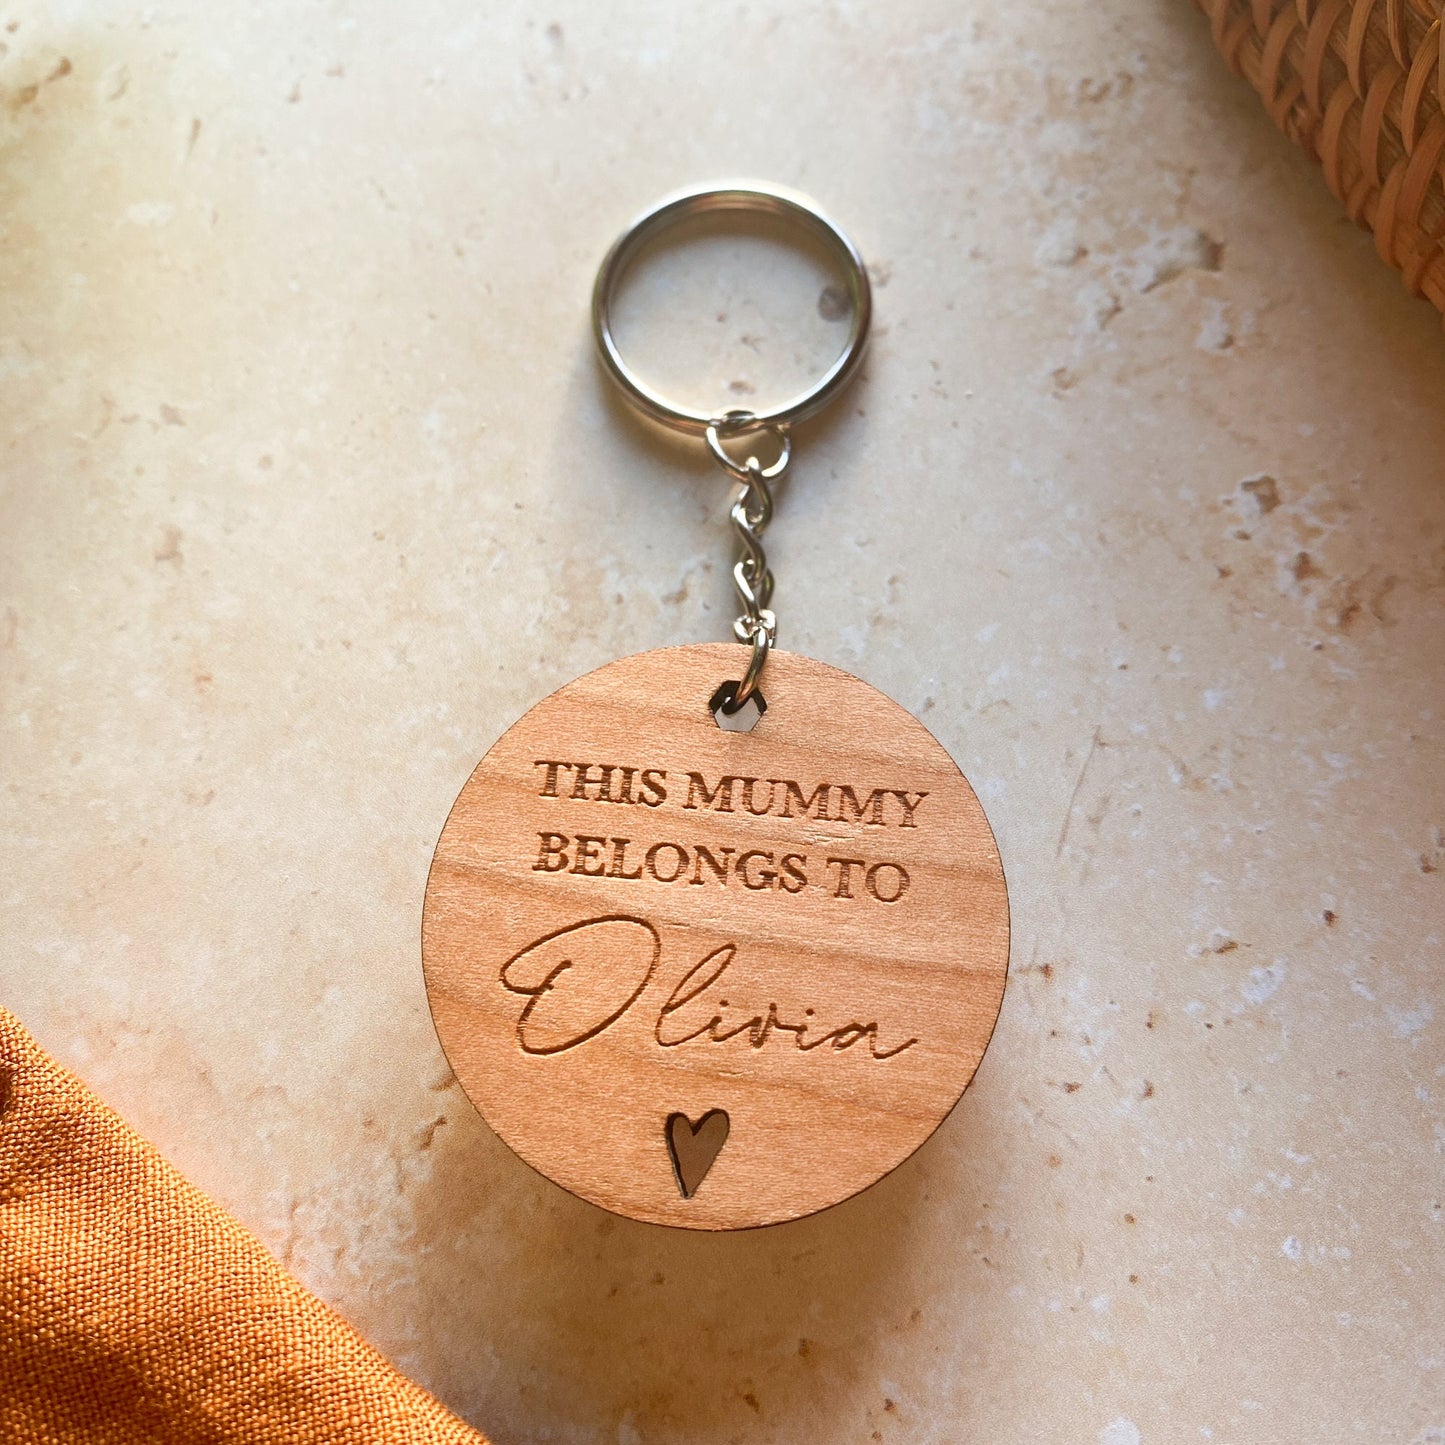 This Mummy Belongs to Wooden Keyring